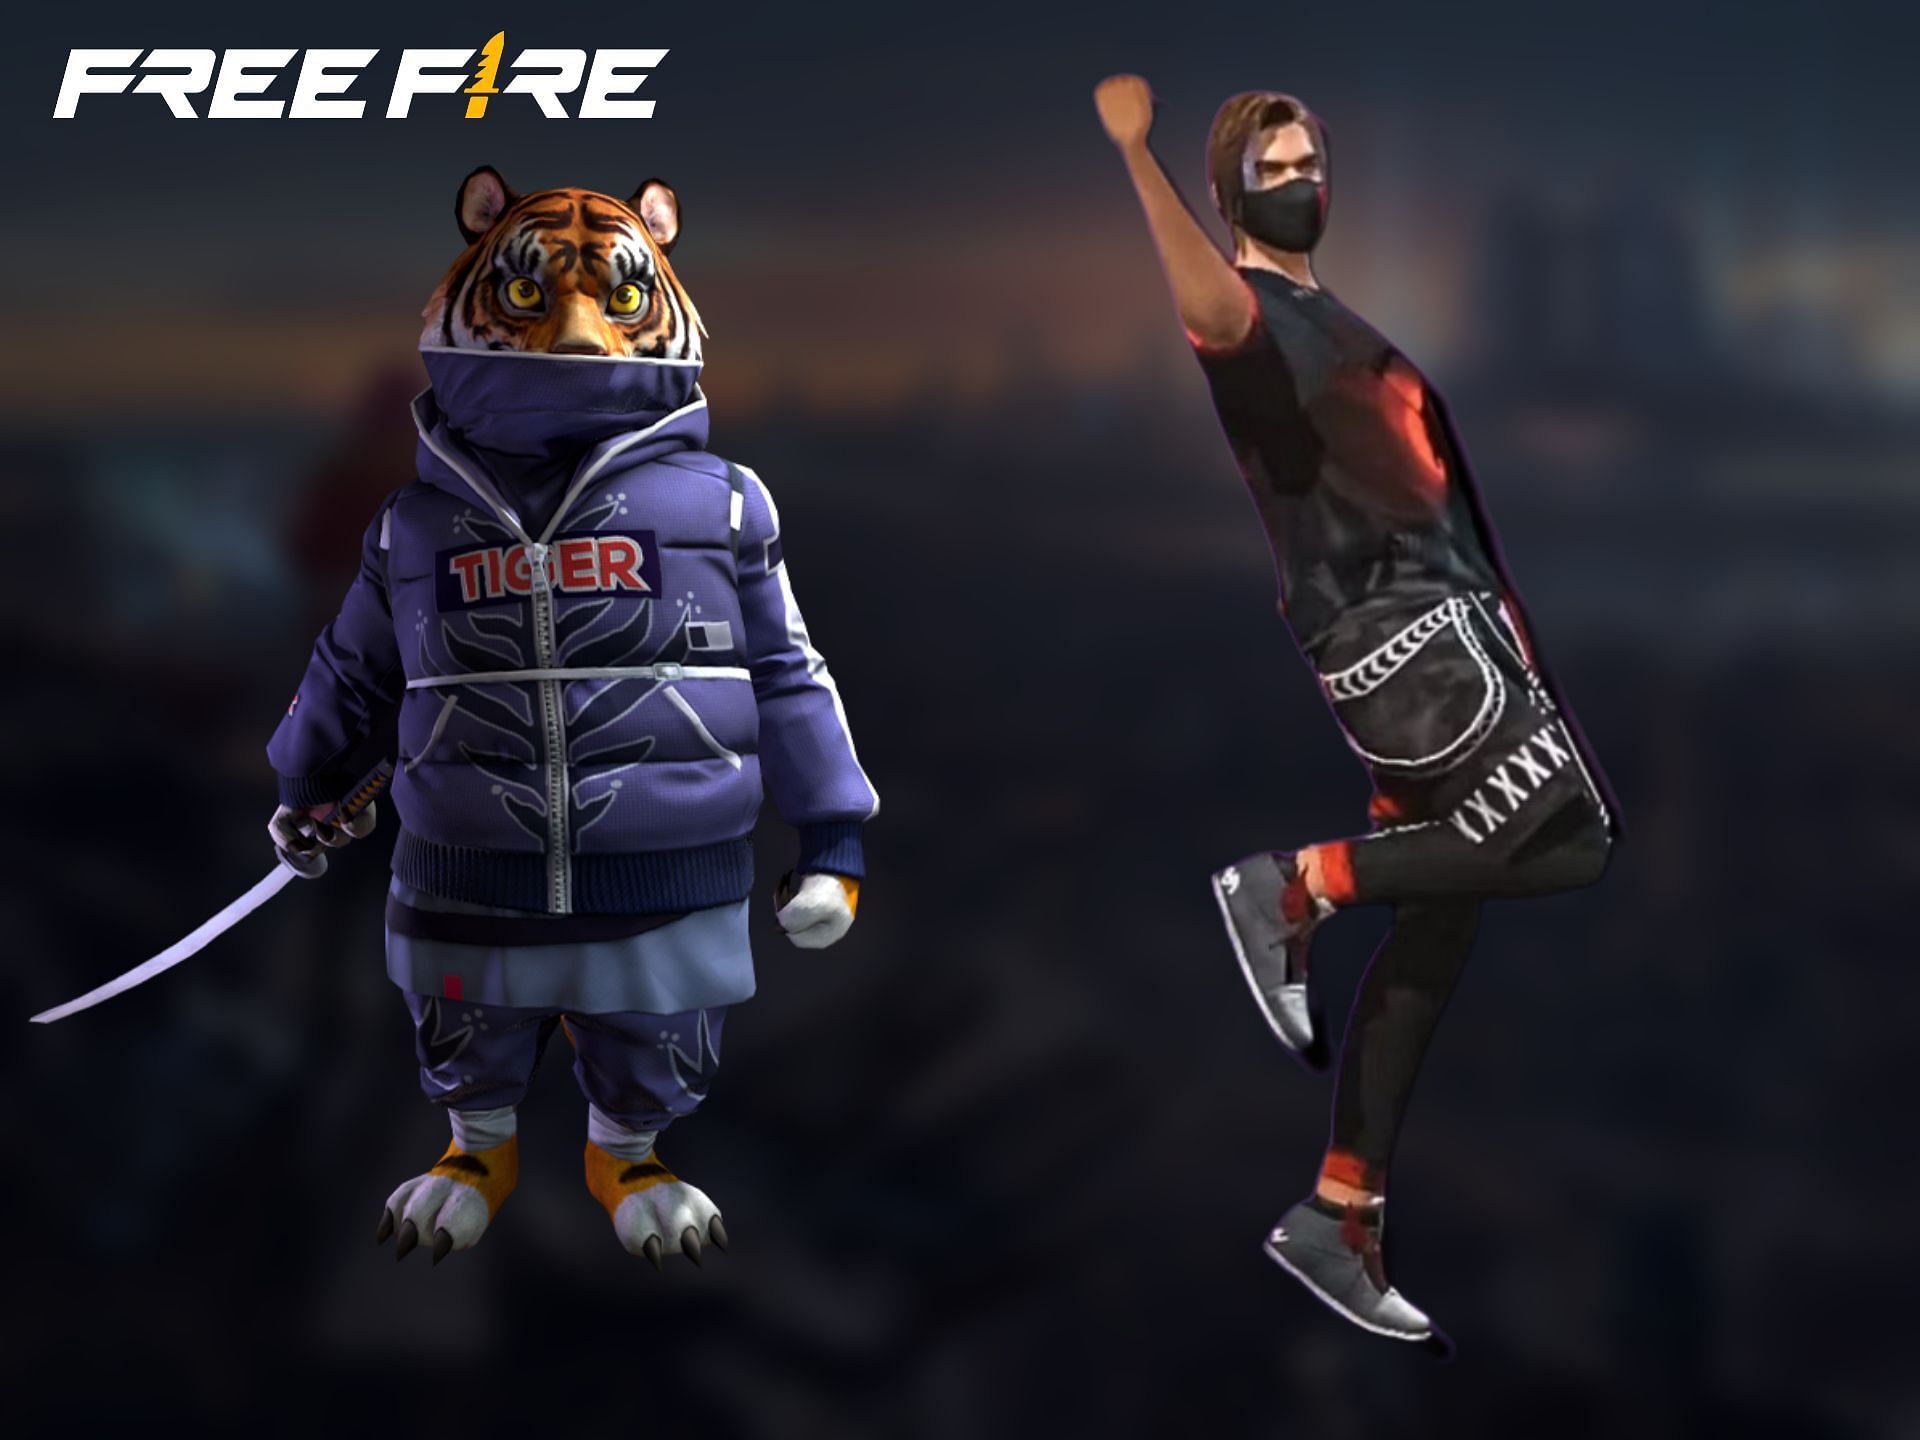 You can receive free pets and emotes from the Free Fire redeem codes (Image via Garena)